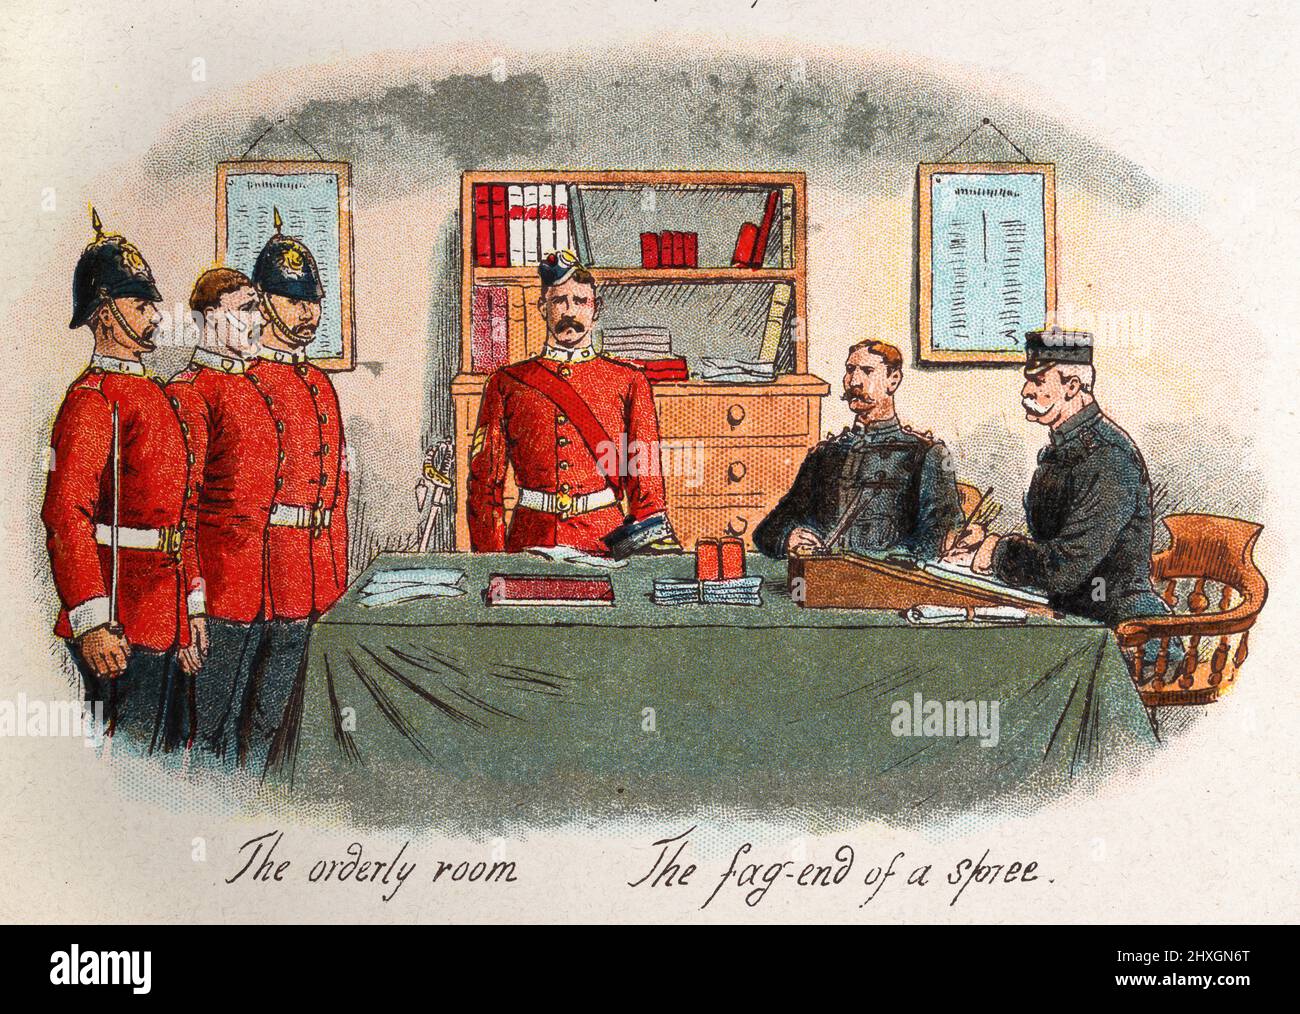 Vintage illustration of The orderly room, the fag end of a spee, Victorian British Military 19th Century Stock Photo